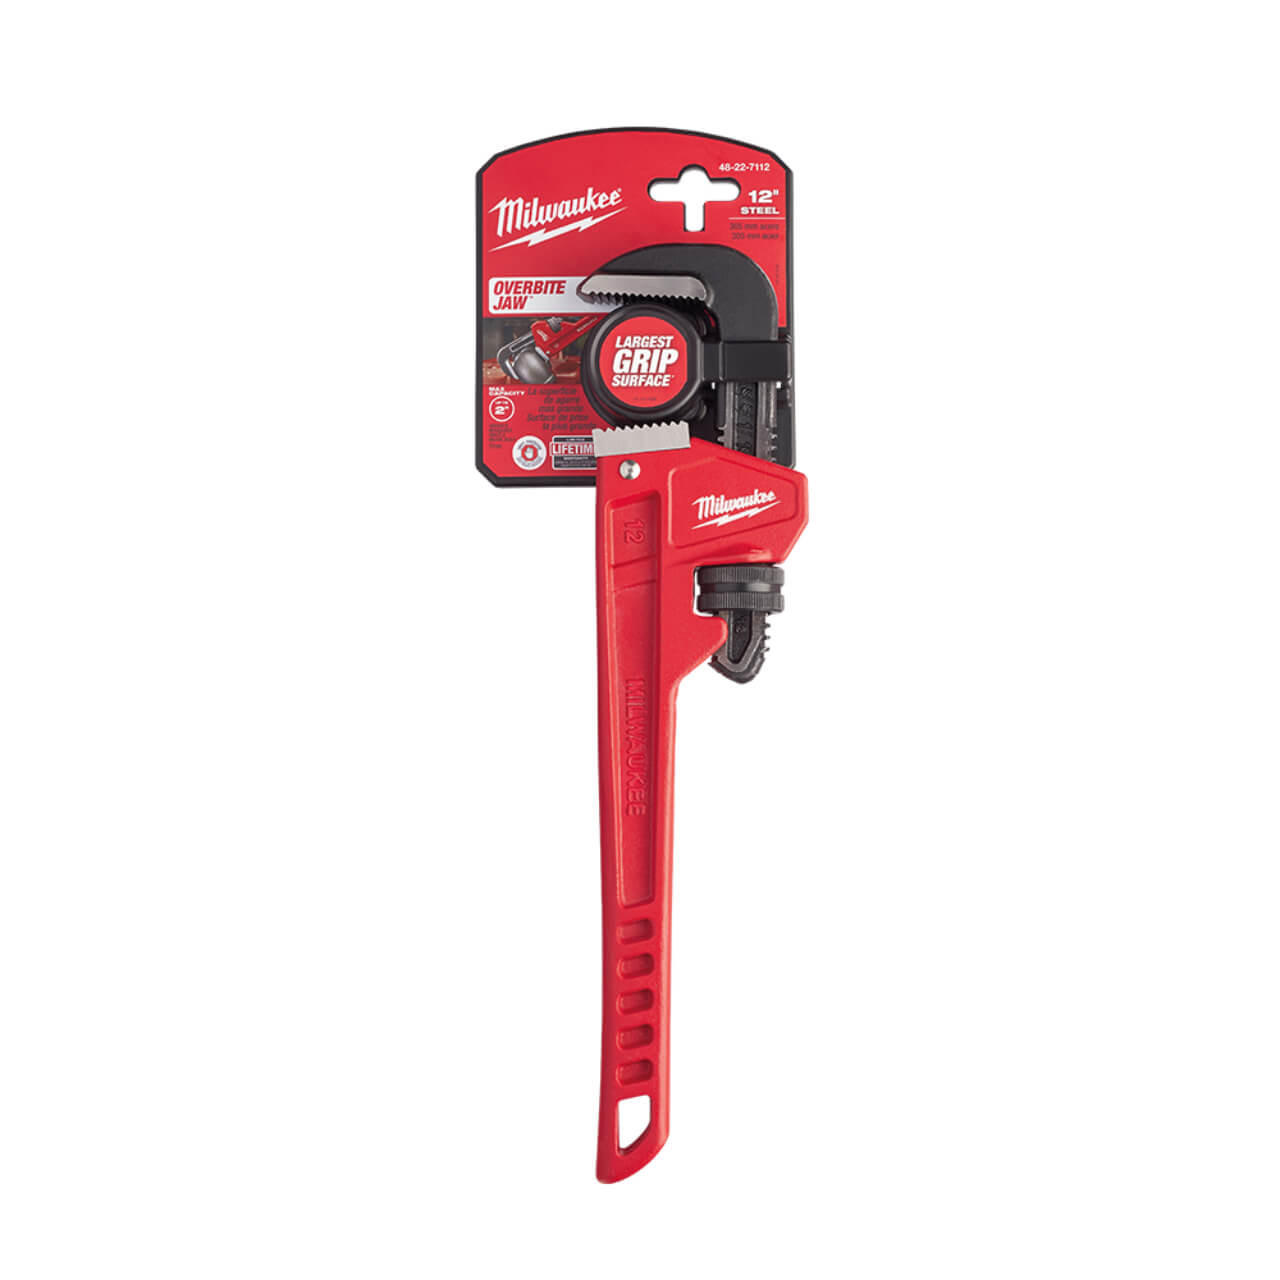 Milwaukee 304mm Steel Pipe Wrench